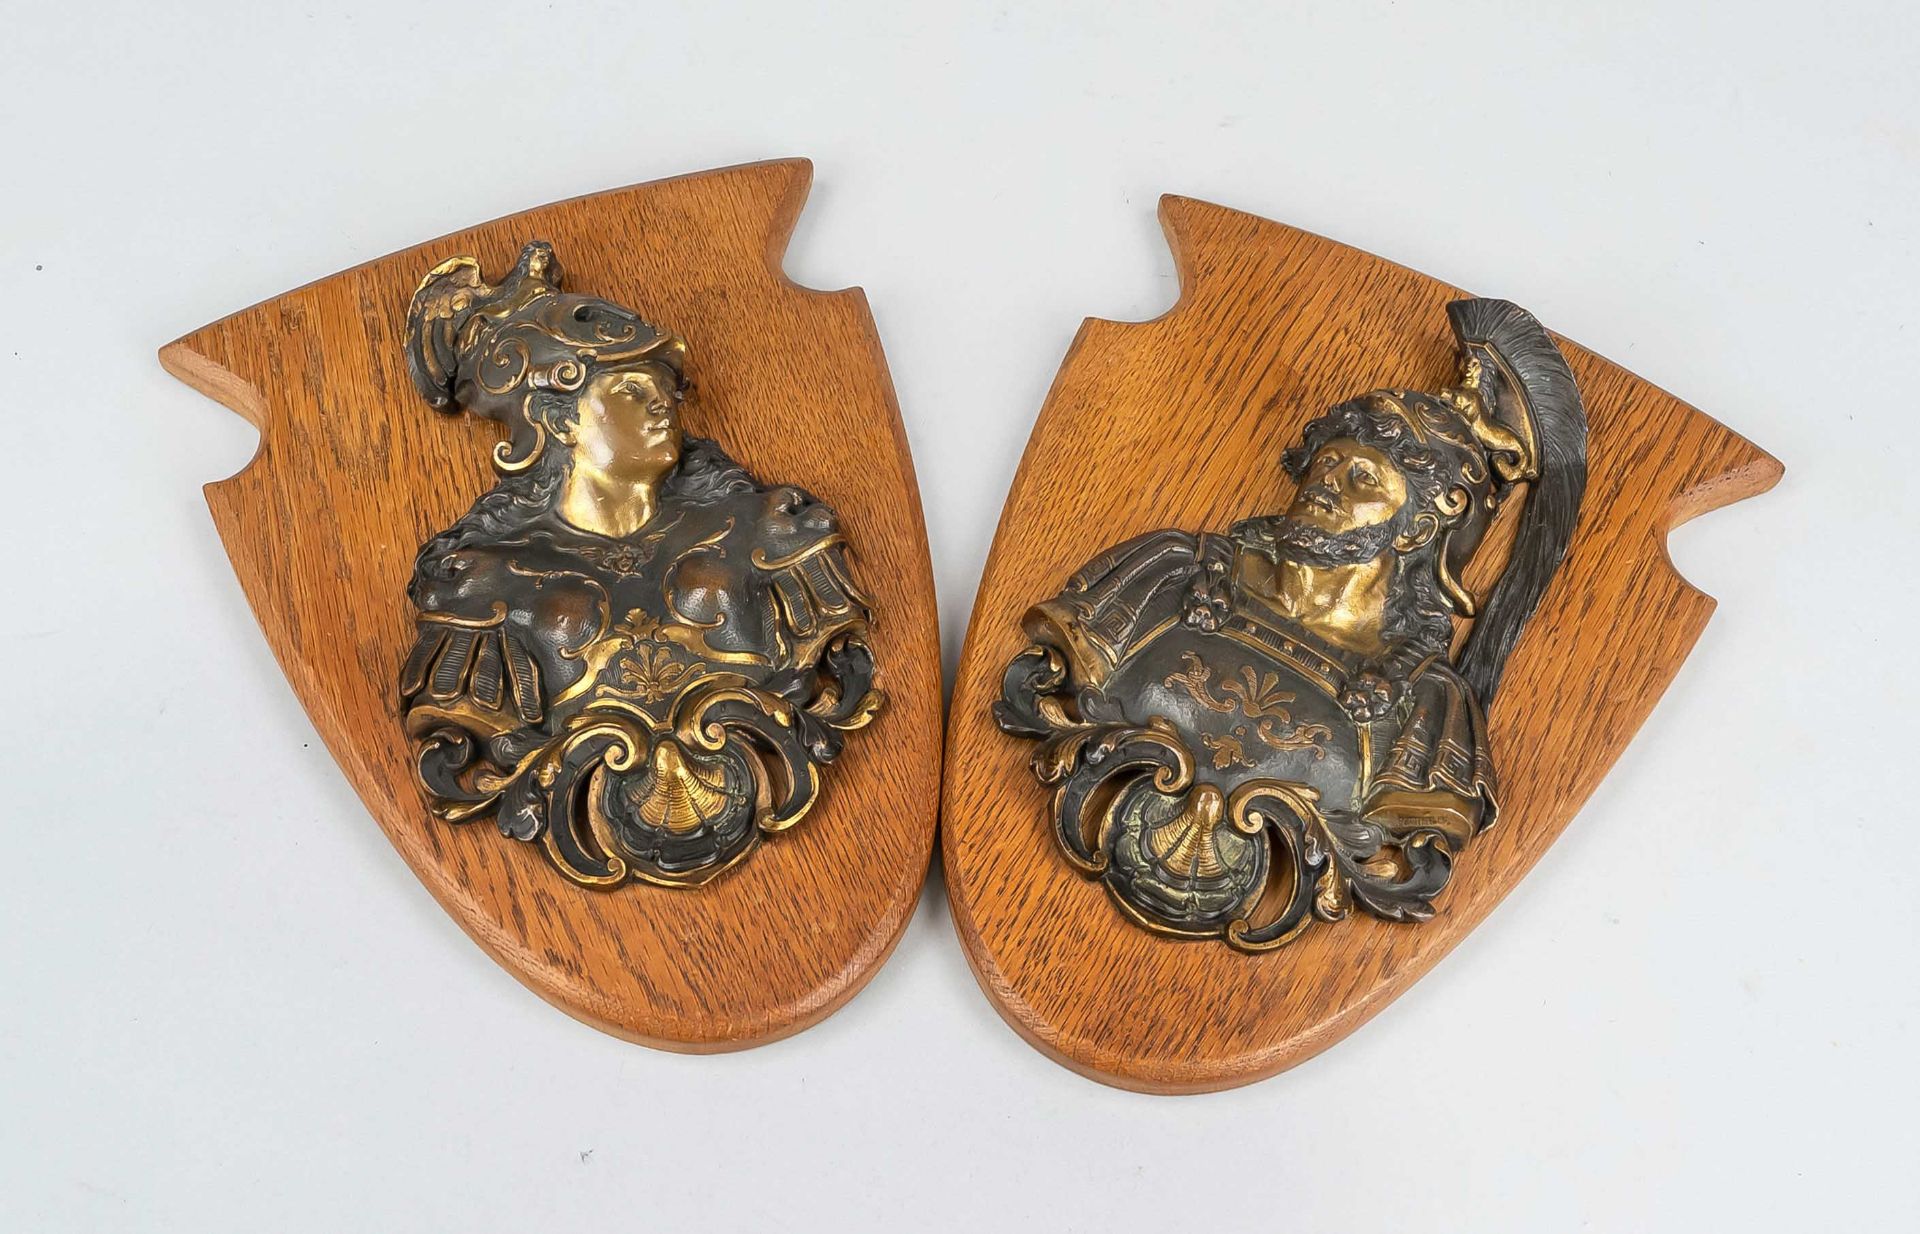 Pair of appliques, 19th/20th c., bronzed and patinated metal casting on crest-shaped oak plinth.